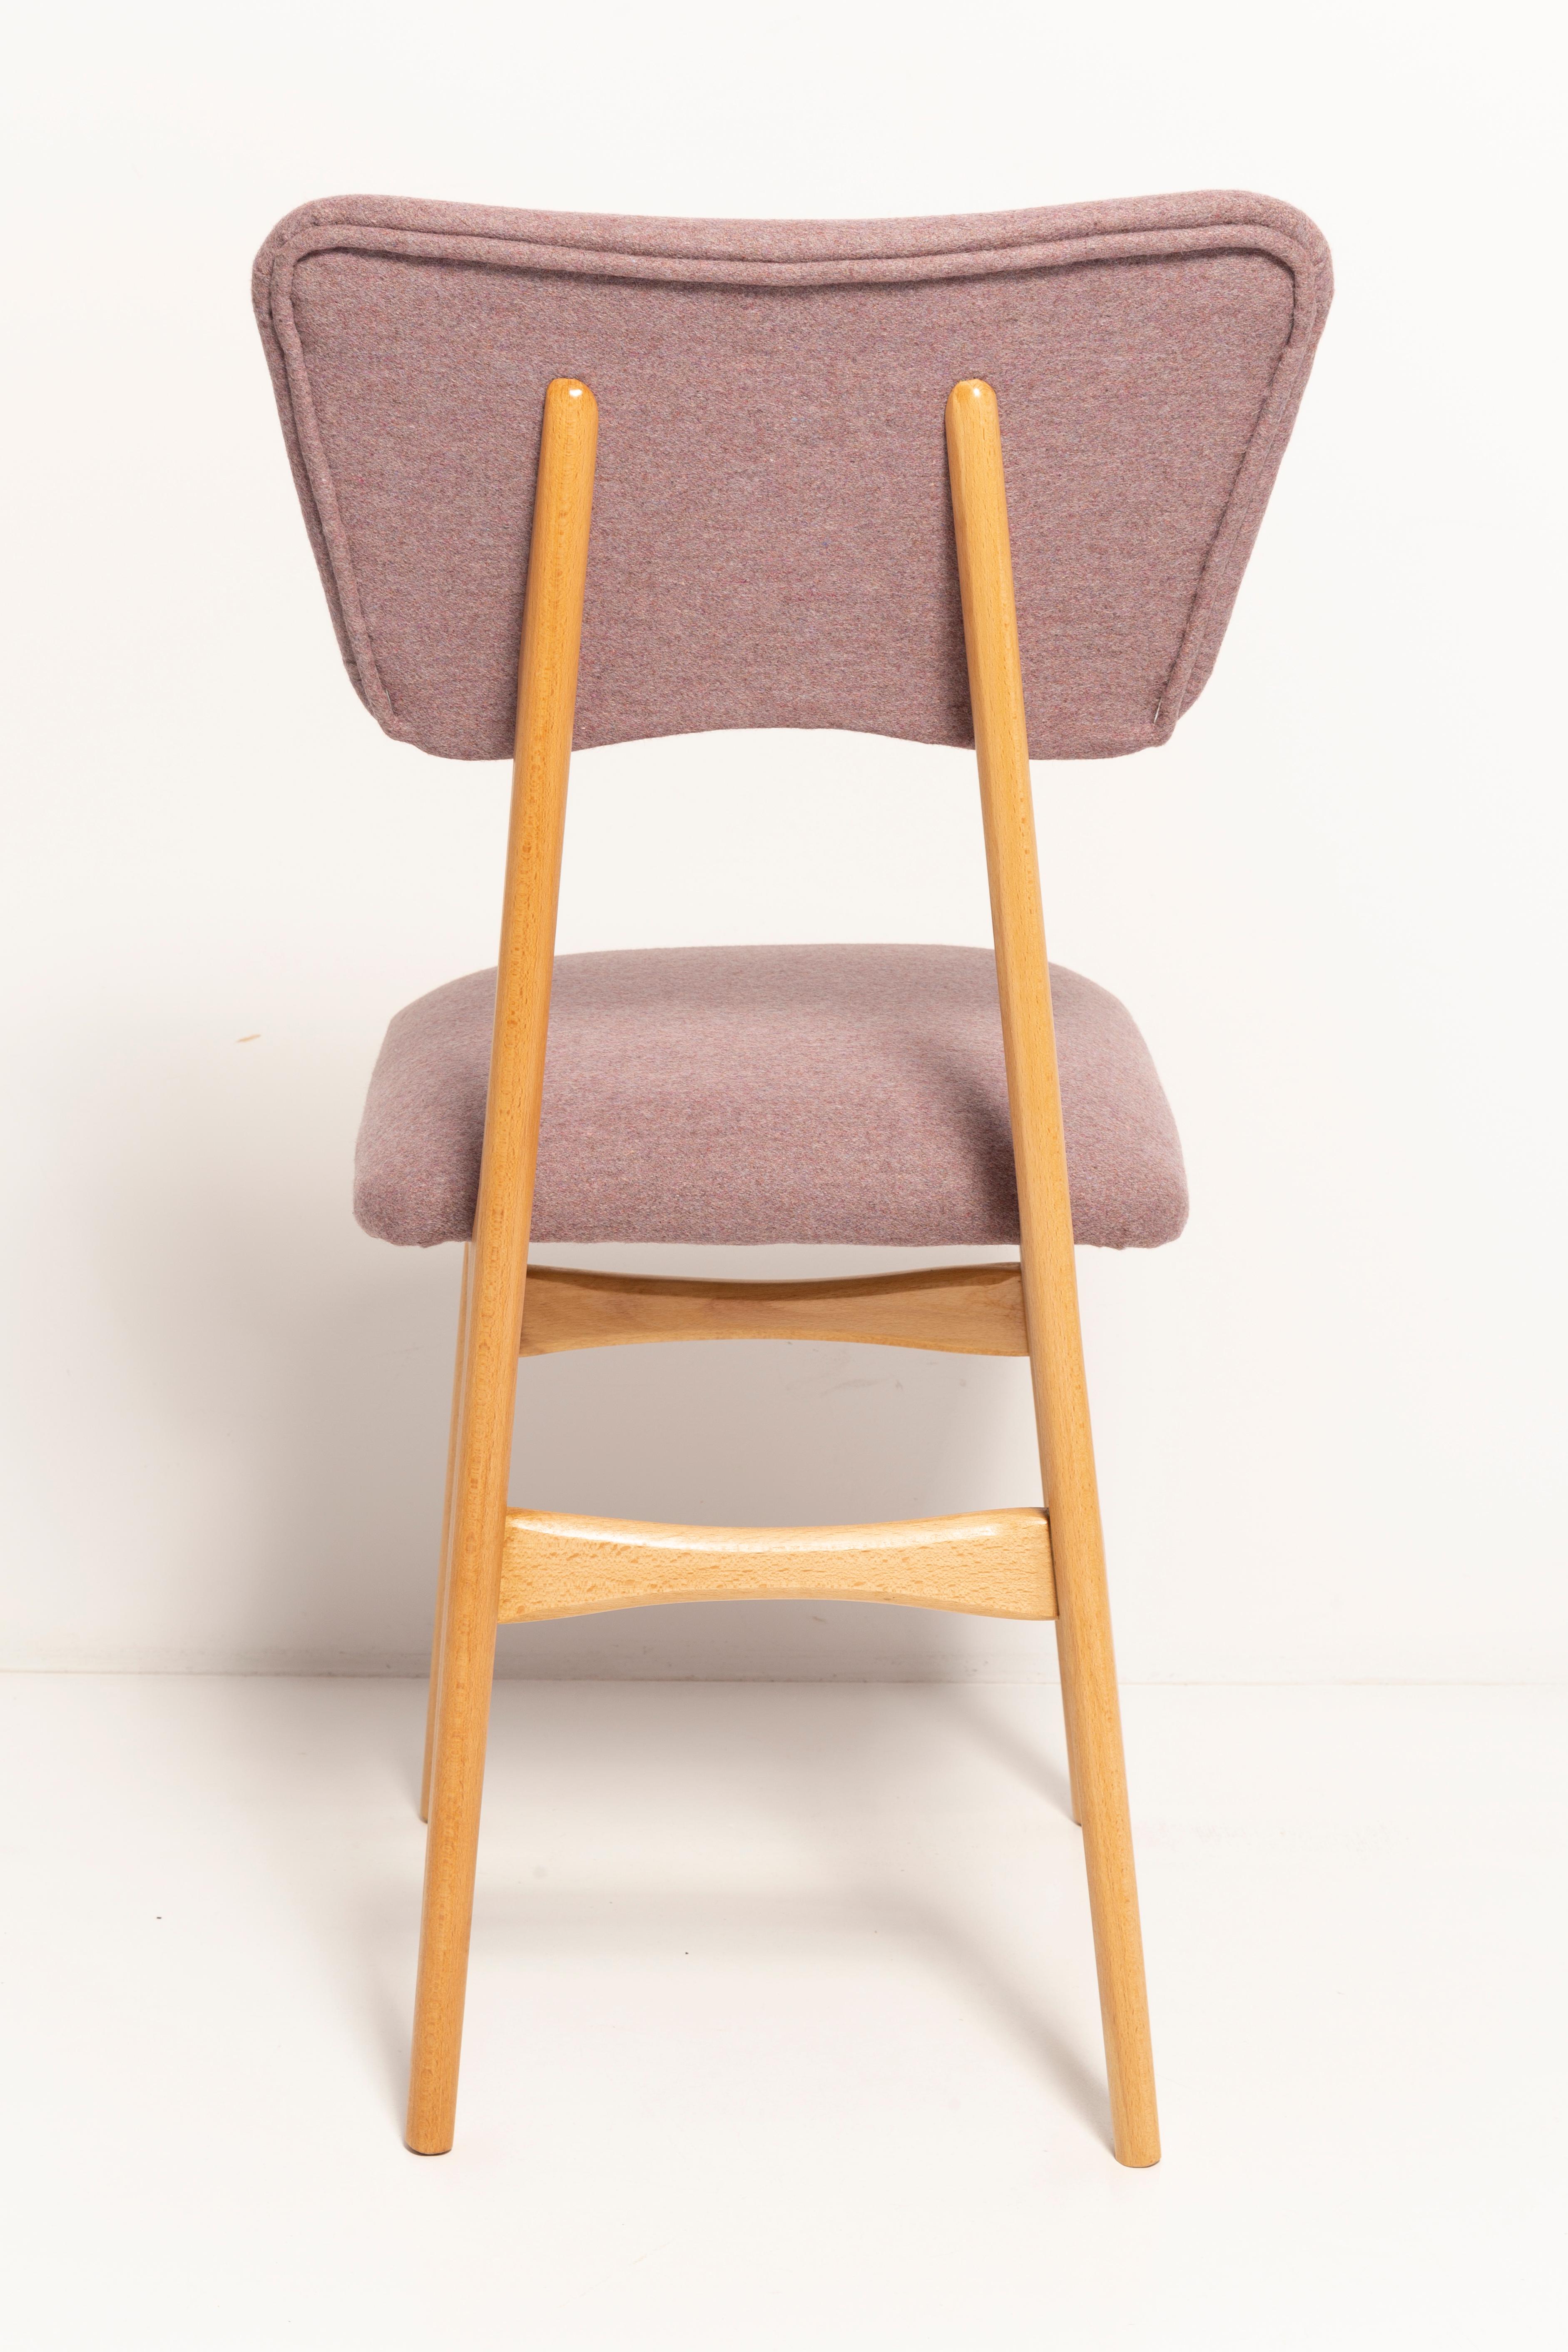 Nine 20th Century Butterfly Dining Chairs, Pink Wool, Light Wood, Europe, 1960s For Sale 2